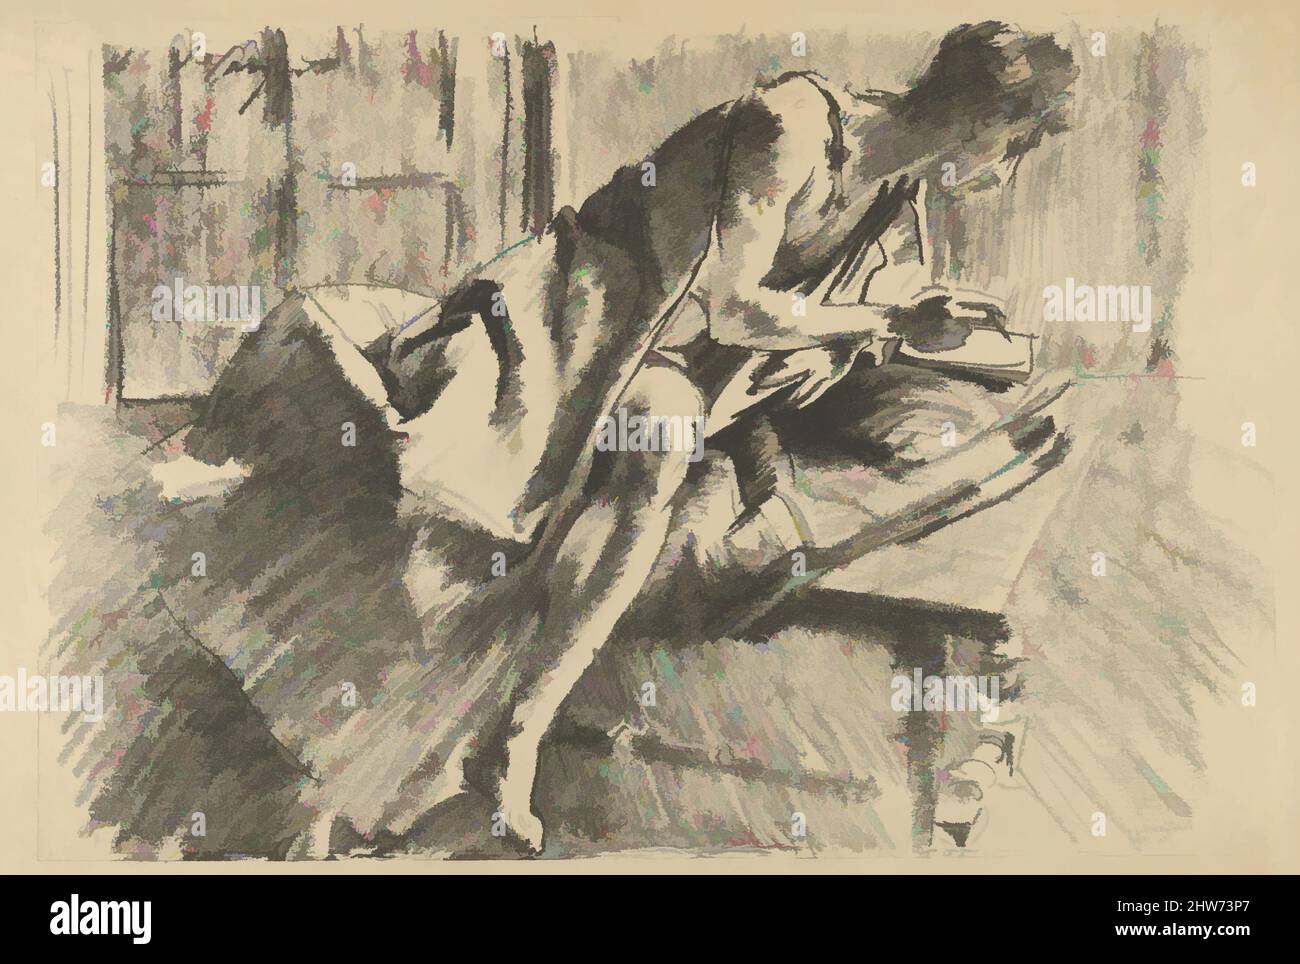 Art inspired by Study of a Young Man, Drawing, 1895, Transfer lithograph, sheet: 12 5/8 x 19 5/8 in. (32.1 x 49.9 cm), Prints, John Singer Sargent (American, Florence 1856–1925 London), In October 1895, Galerie Rapp in Paris organized one section of a large exhibition at the Palais des, Classic works modernized by Artotop with a splash of modernity. Shapes, color and value, eye-catching visual impact on art. Emotions through freedom of artworks in a contemporary way. A timeless message pursuing a wildly creative new direction. Artists turning to the digital medium and creating the Artotop NFT Stock Photo